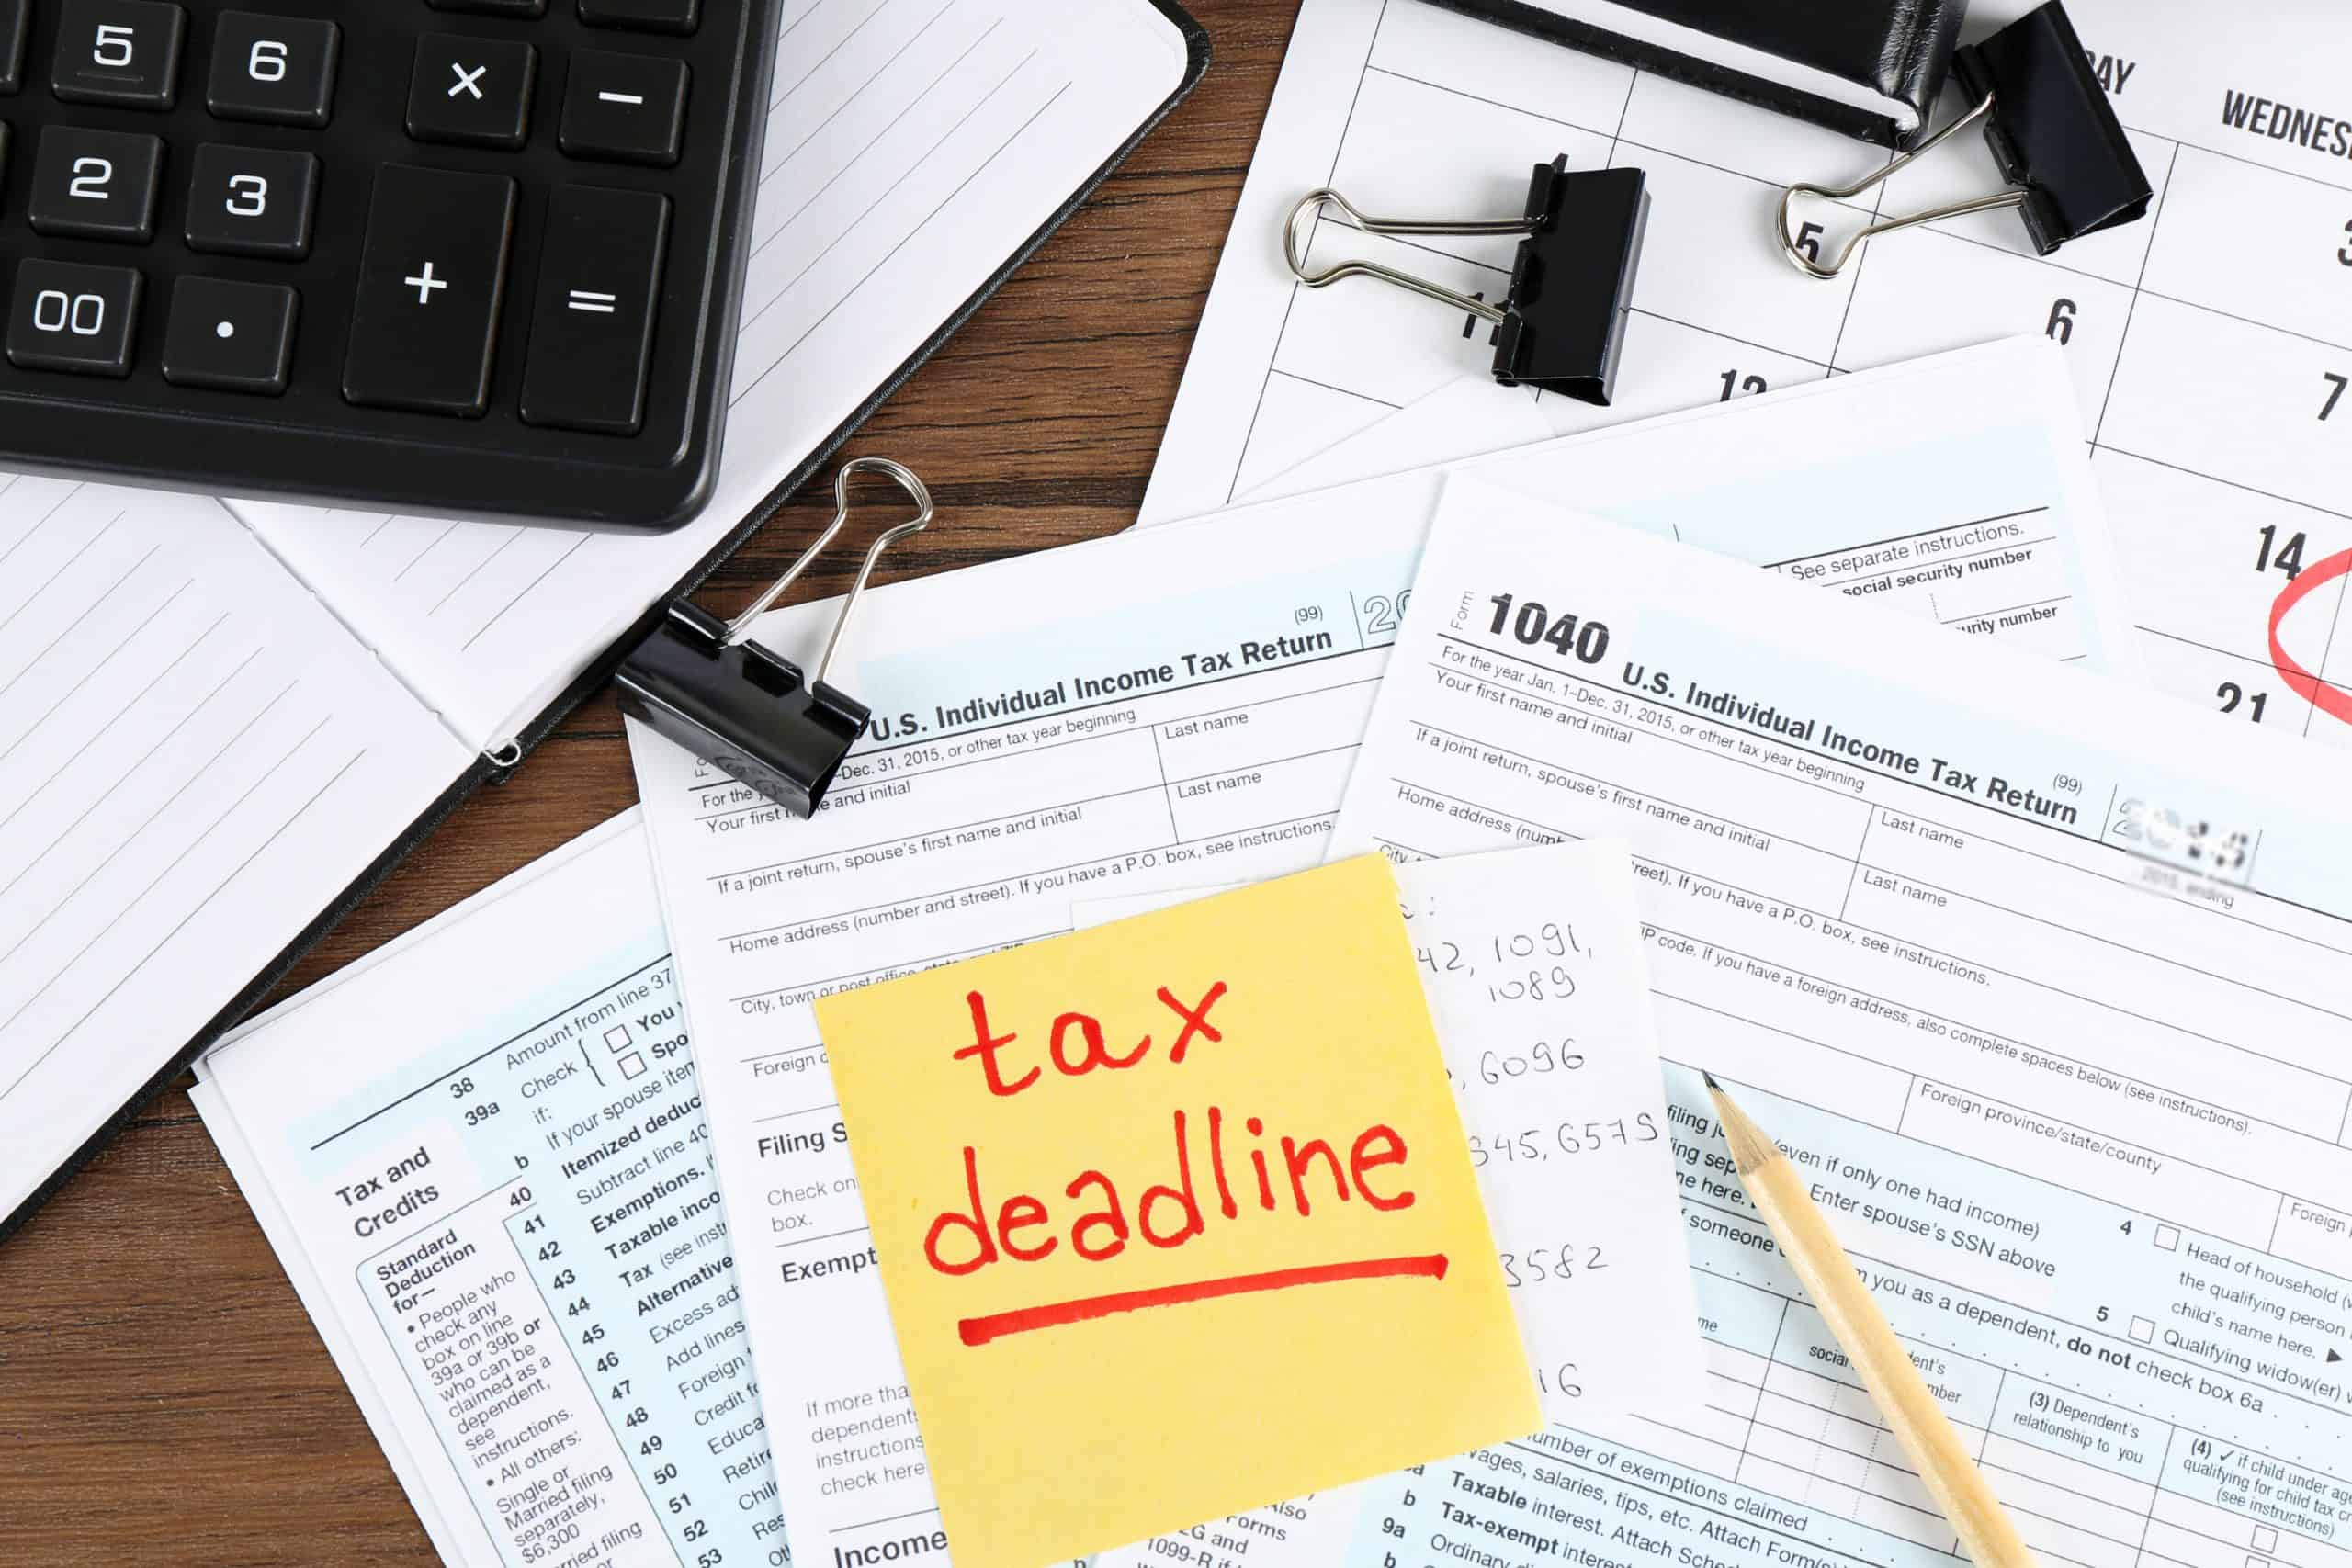 IRS Extends Tax Deadline to May 17, 2021